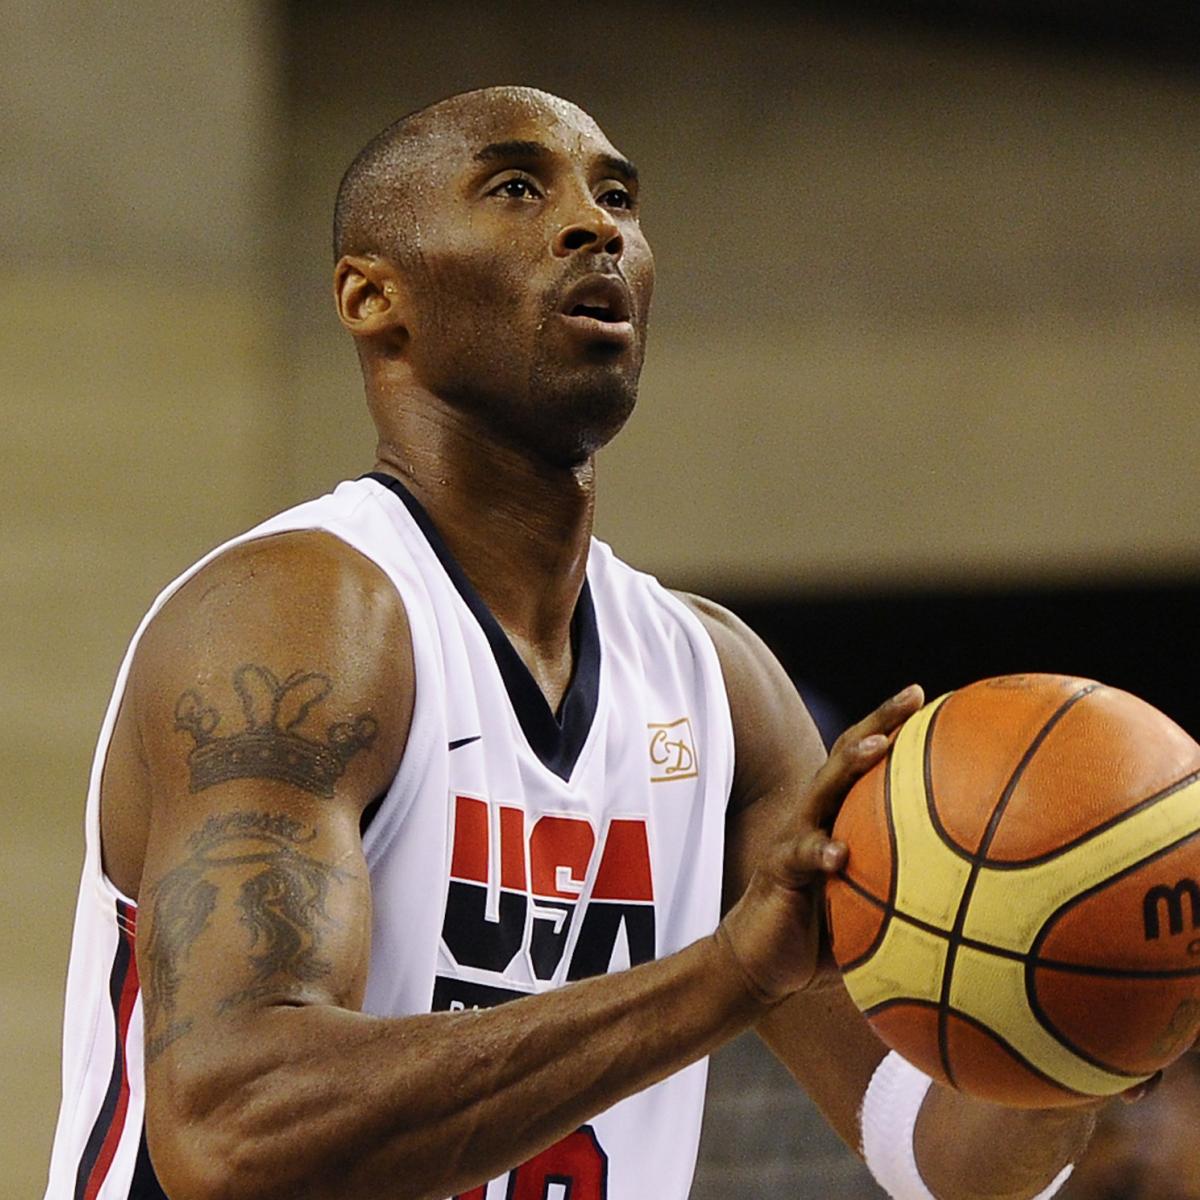 Olympics Basketball 2012: Ranking 5 Best Non-NBA Players to Watch